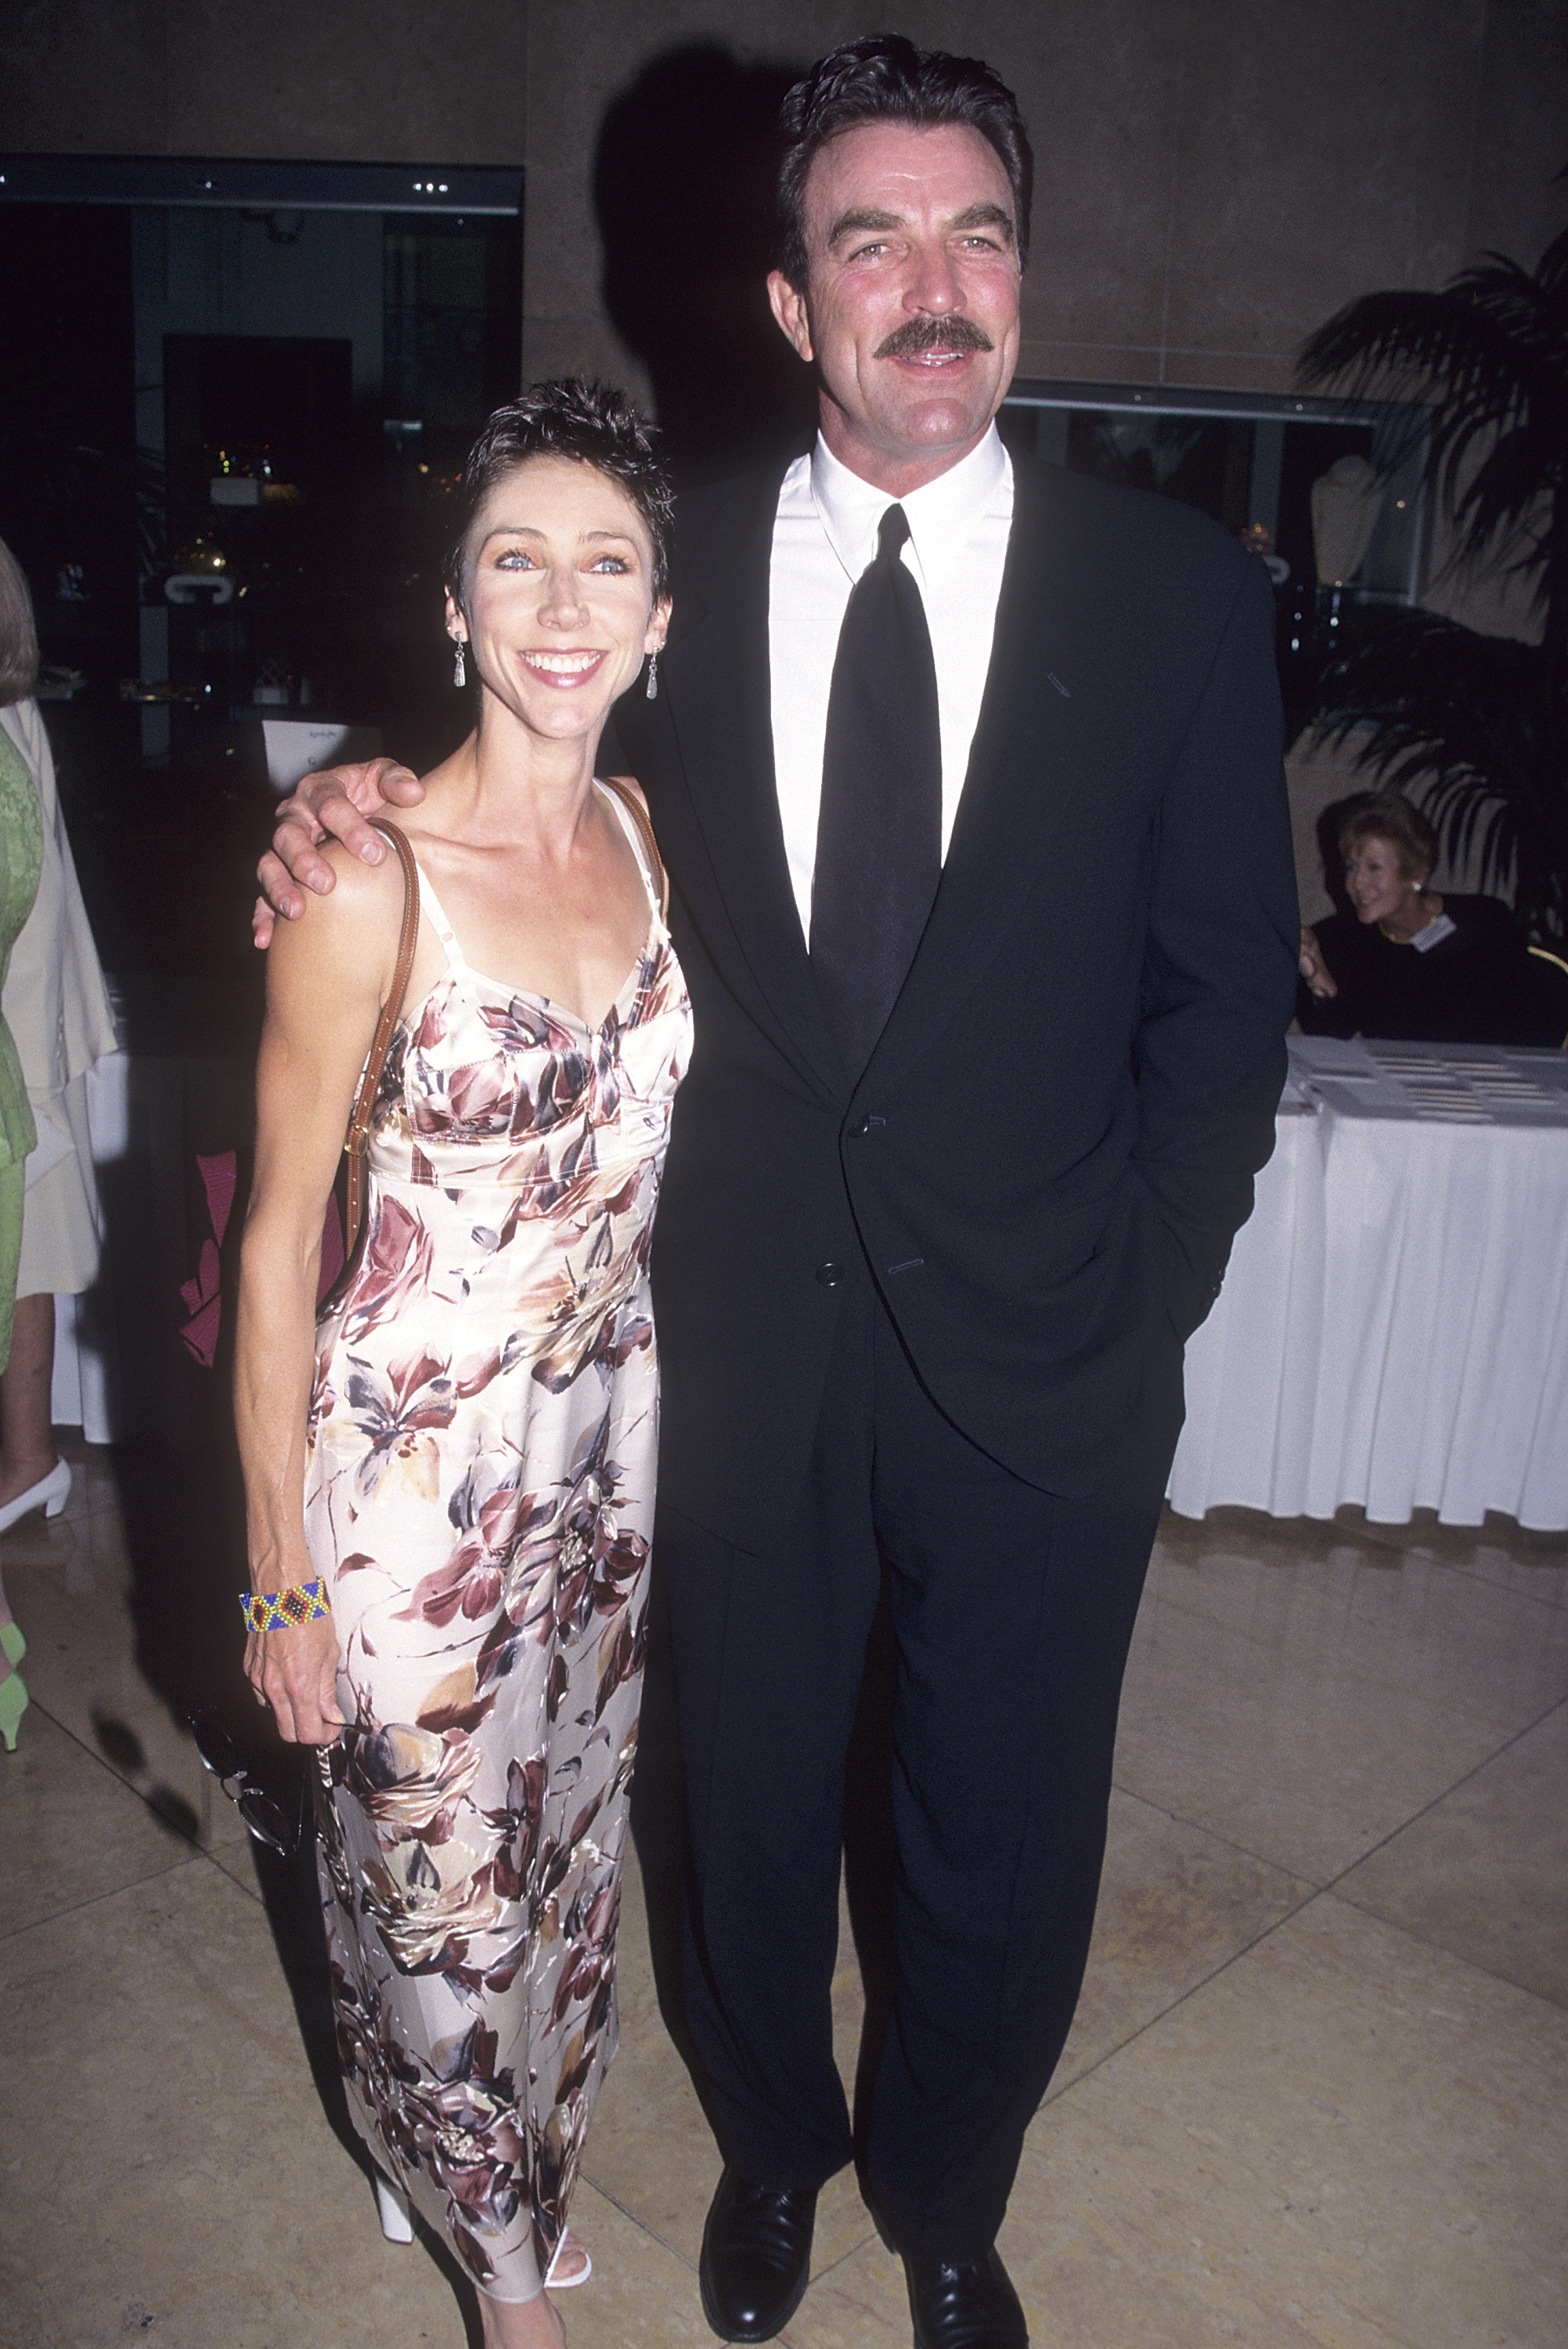 Tom Selleck and Jillie Mack attend the Ronald Reagon Presidential Foundation's Freedom Award Salute to Bob Hope in Beverly Hills, California, on May 29, 1997. | Source: Getty Images